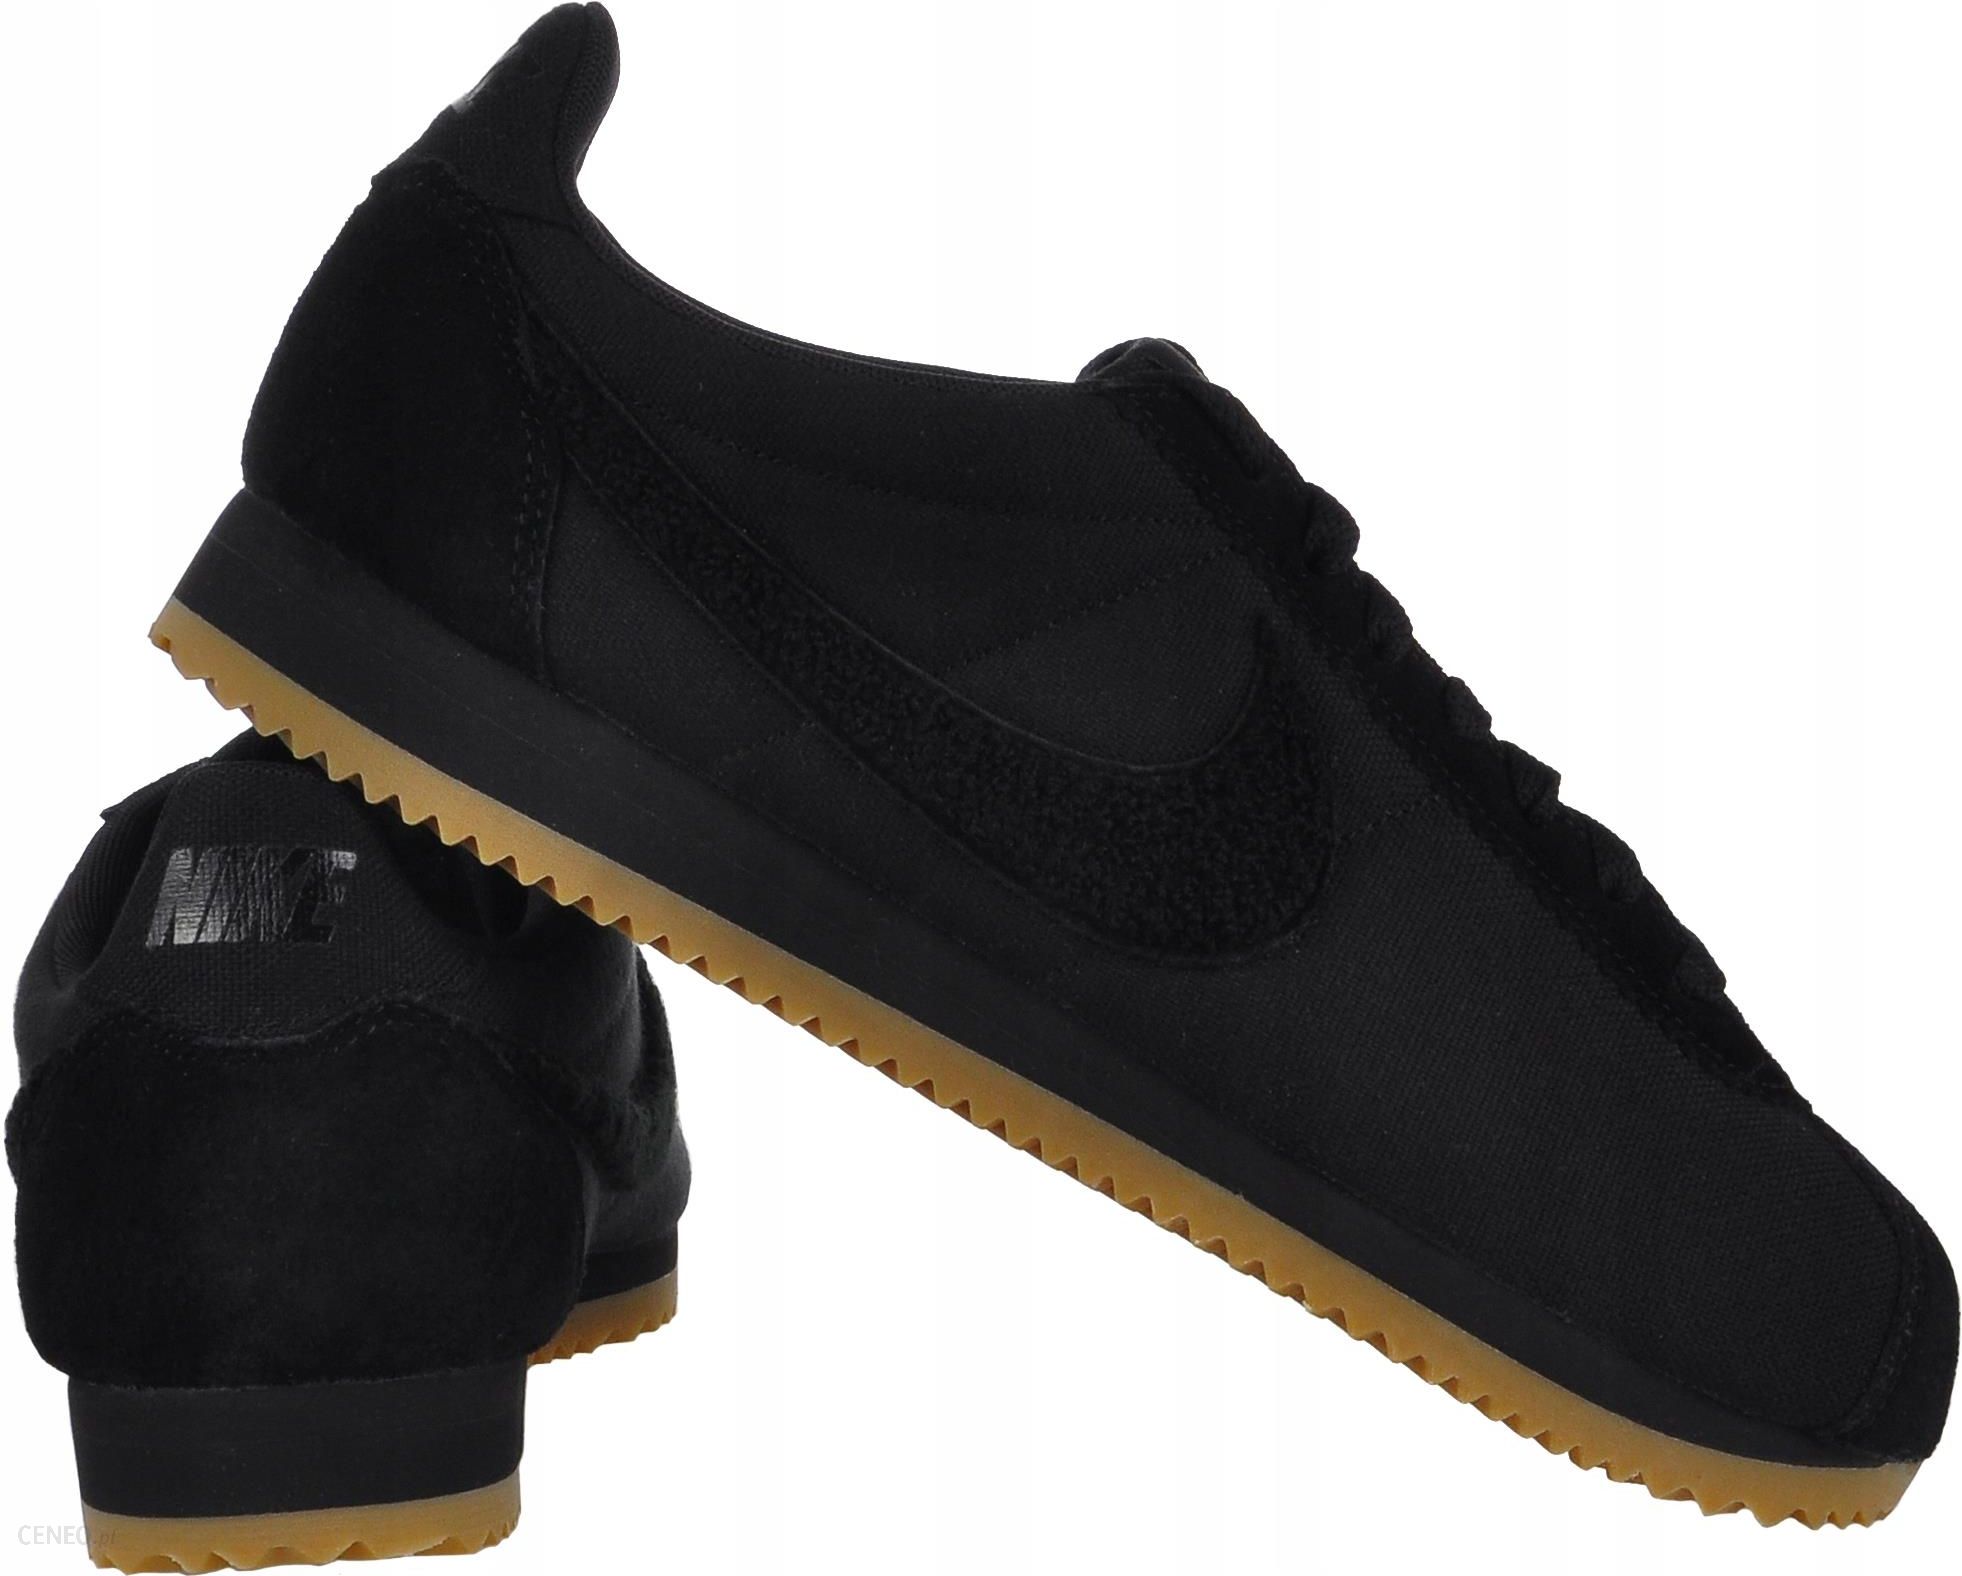 nike cortez 47 Online Shopping mall | Find the best prices and